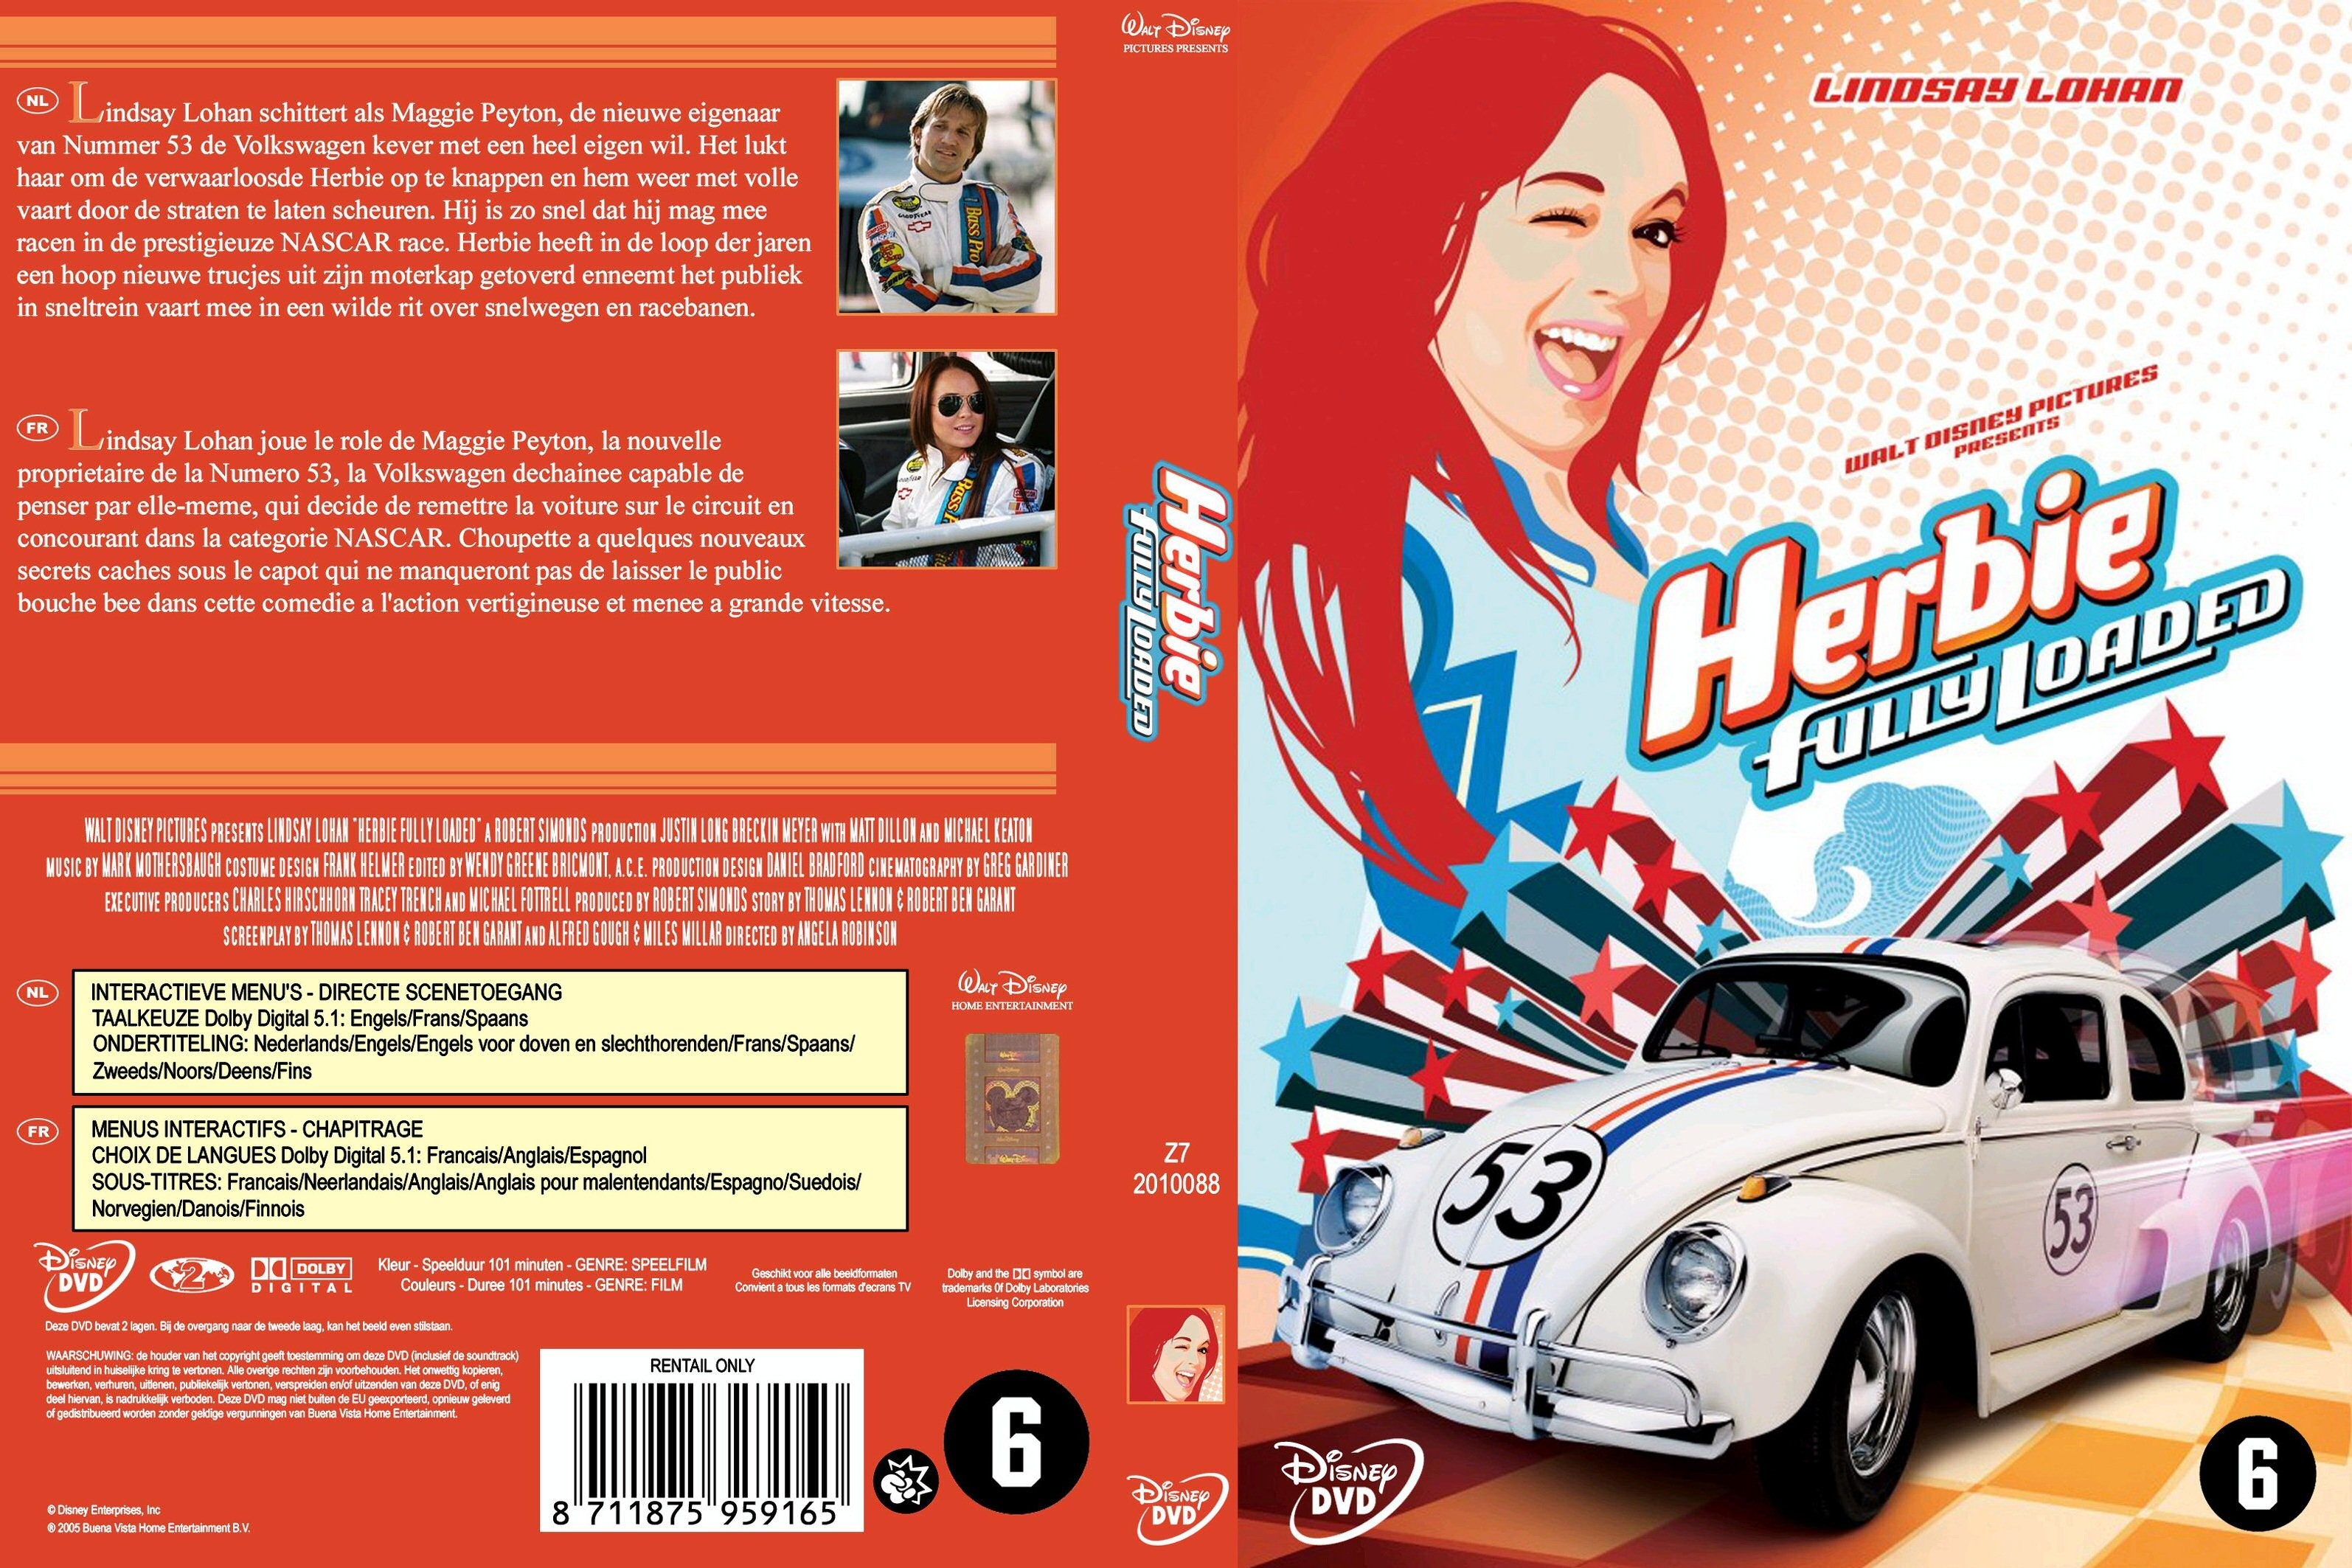 Jaquette DVD Herbie fully loaded